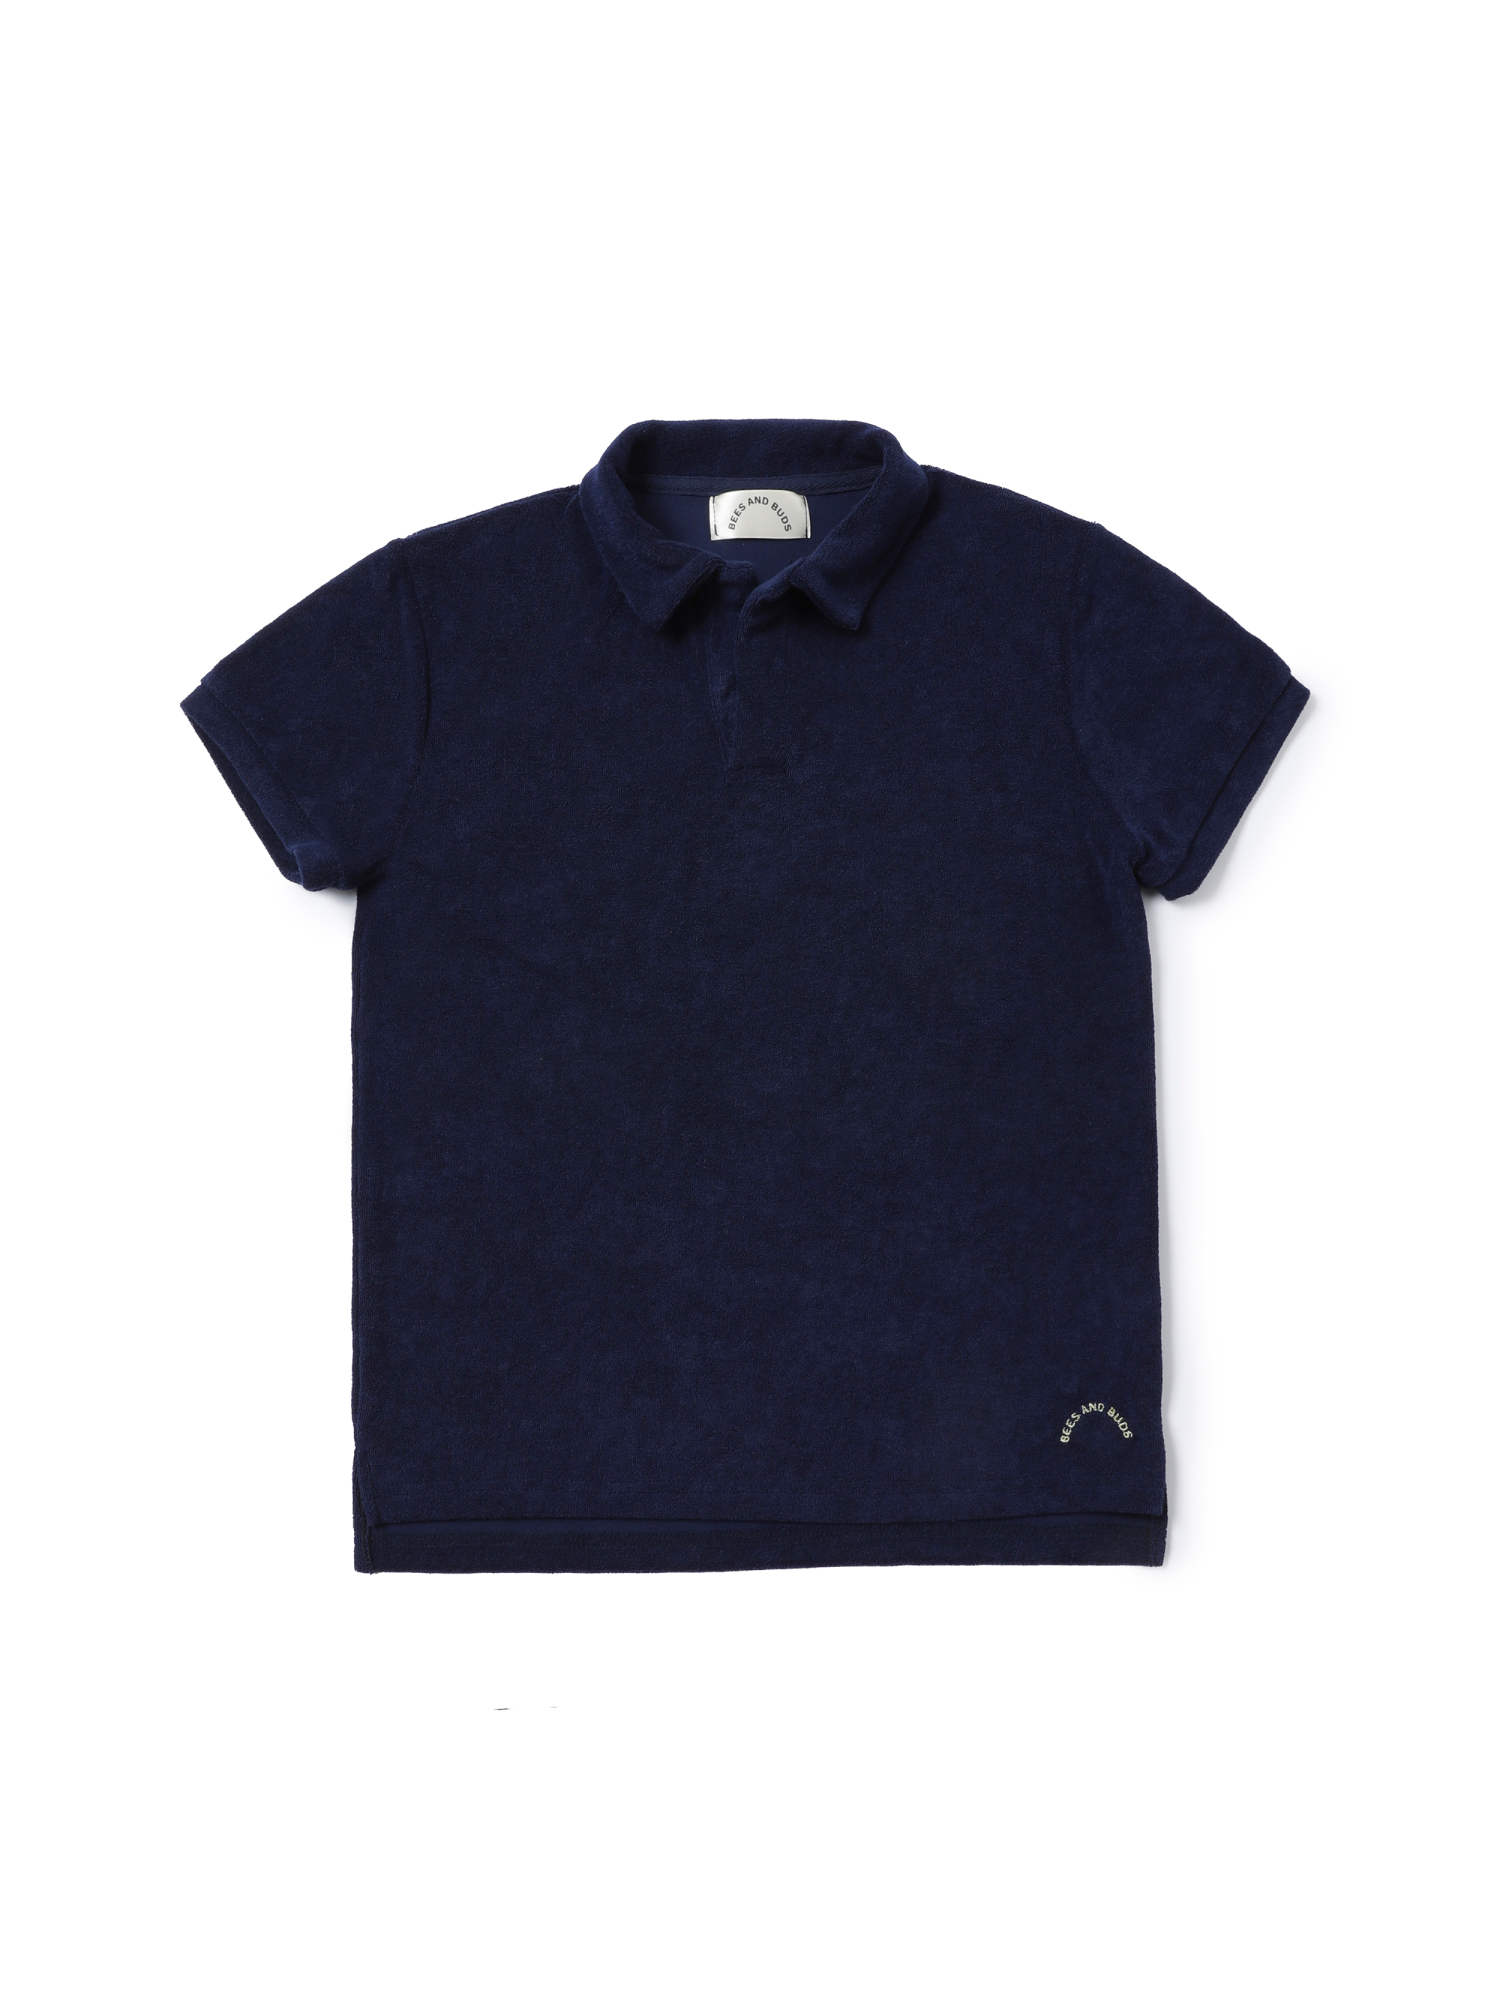 Active#1 Terry Shirts - Navy